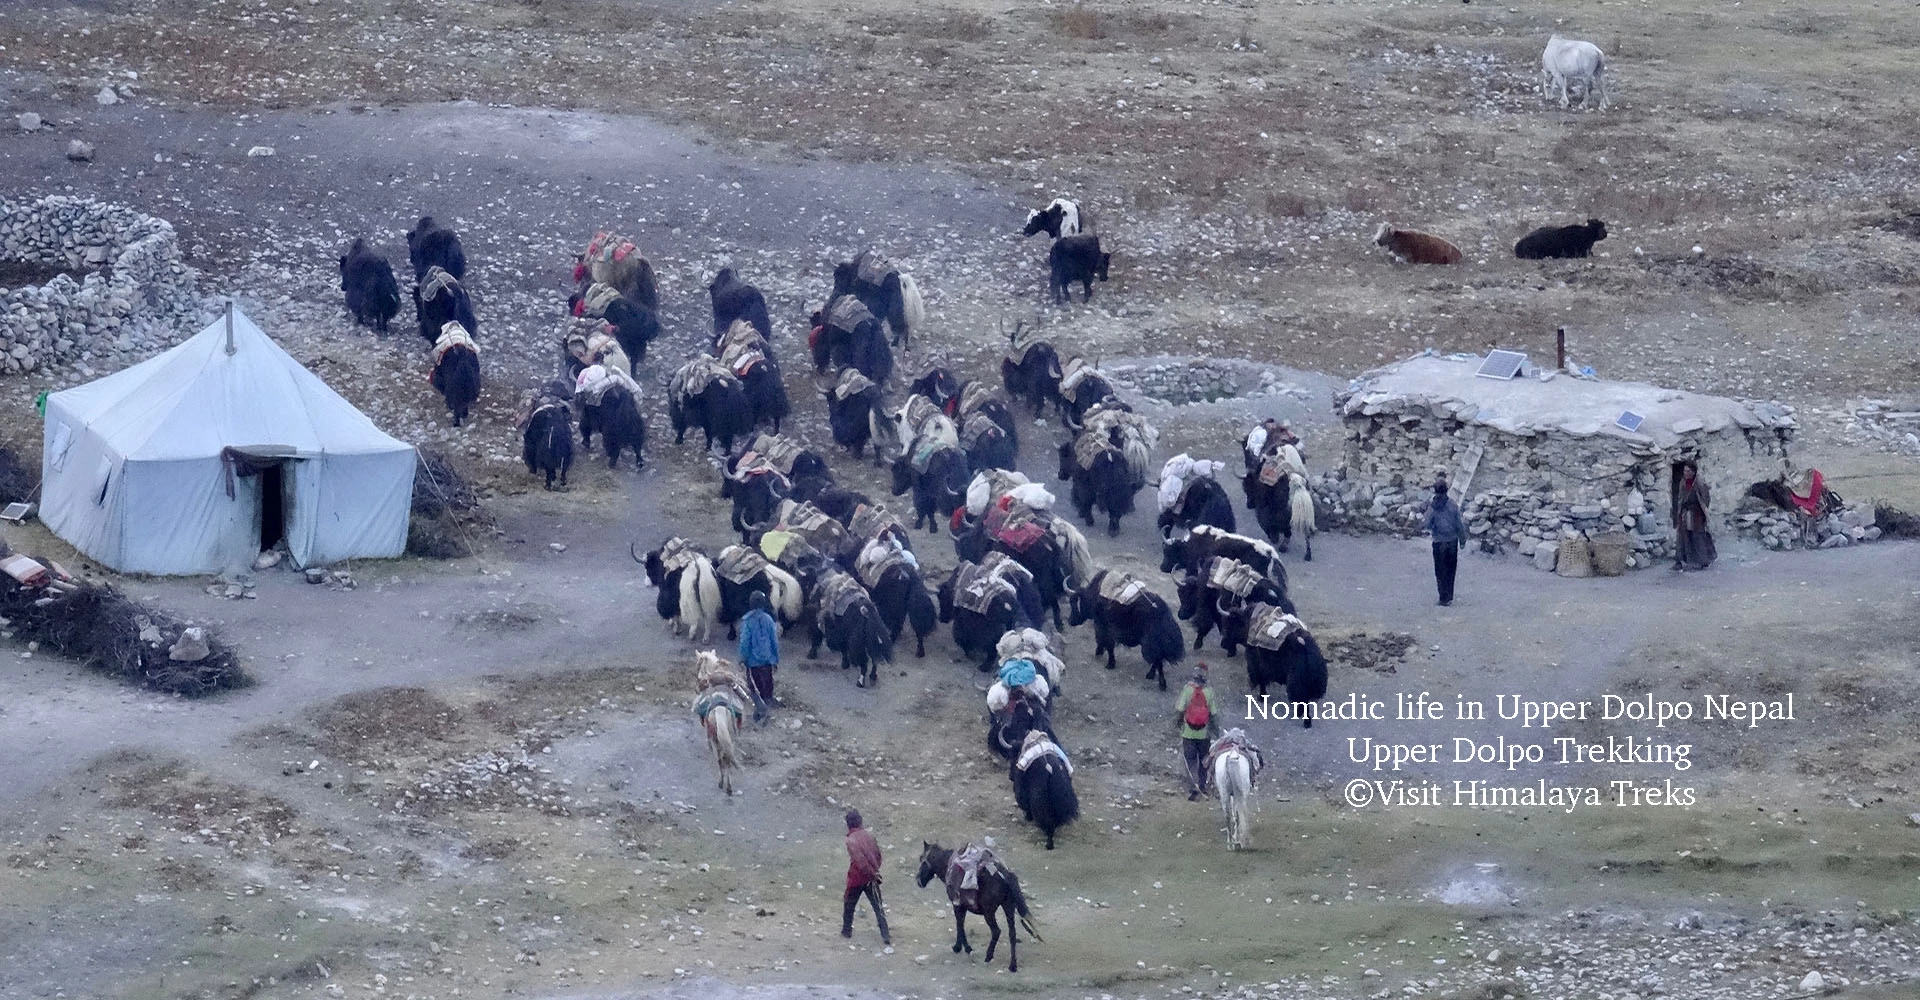 Everything You Need to Know About Upper Dolpo Trekking in Nepal